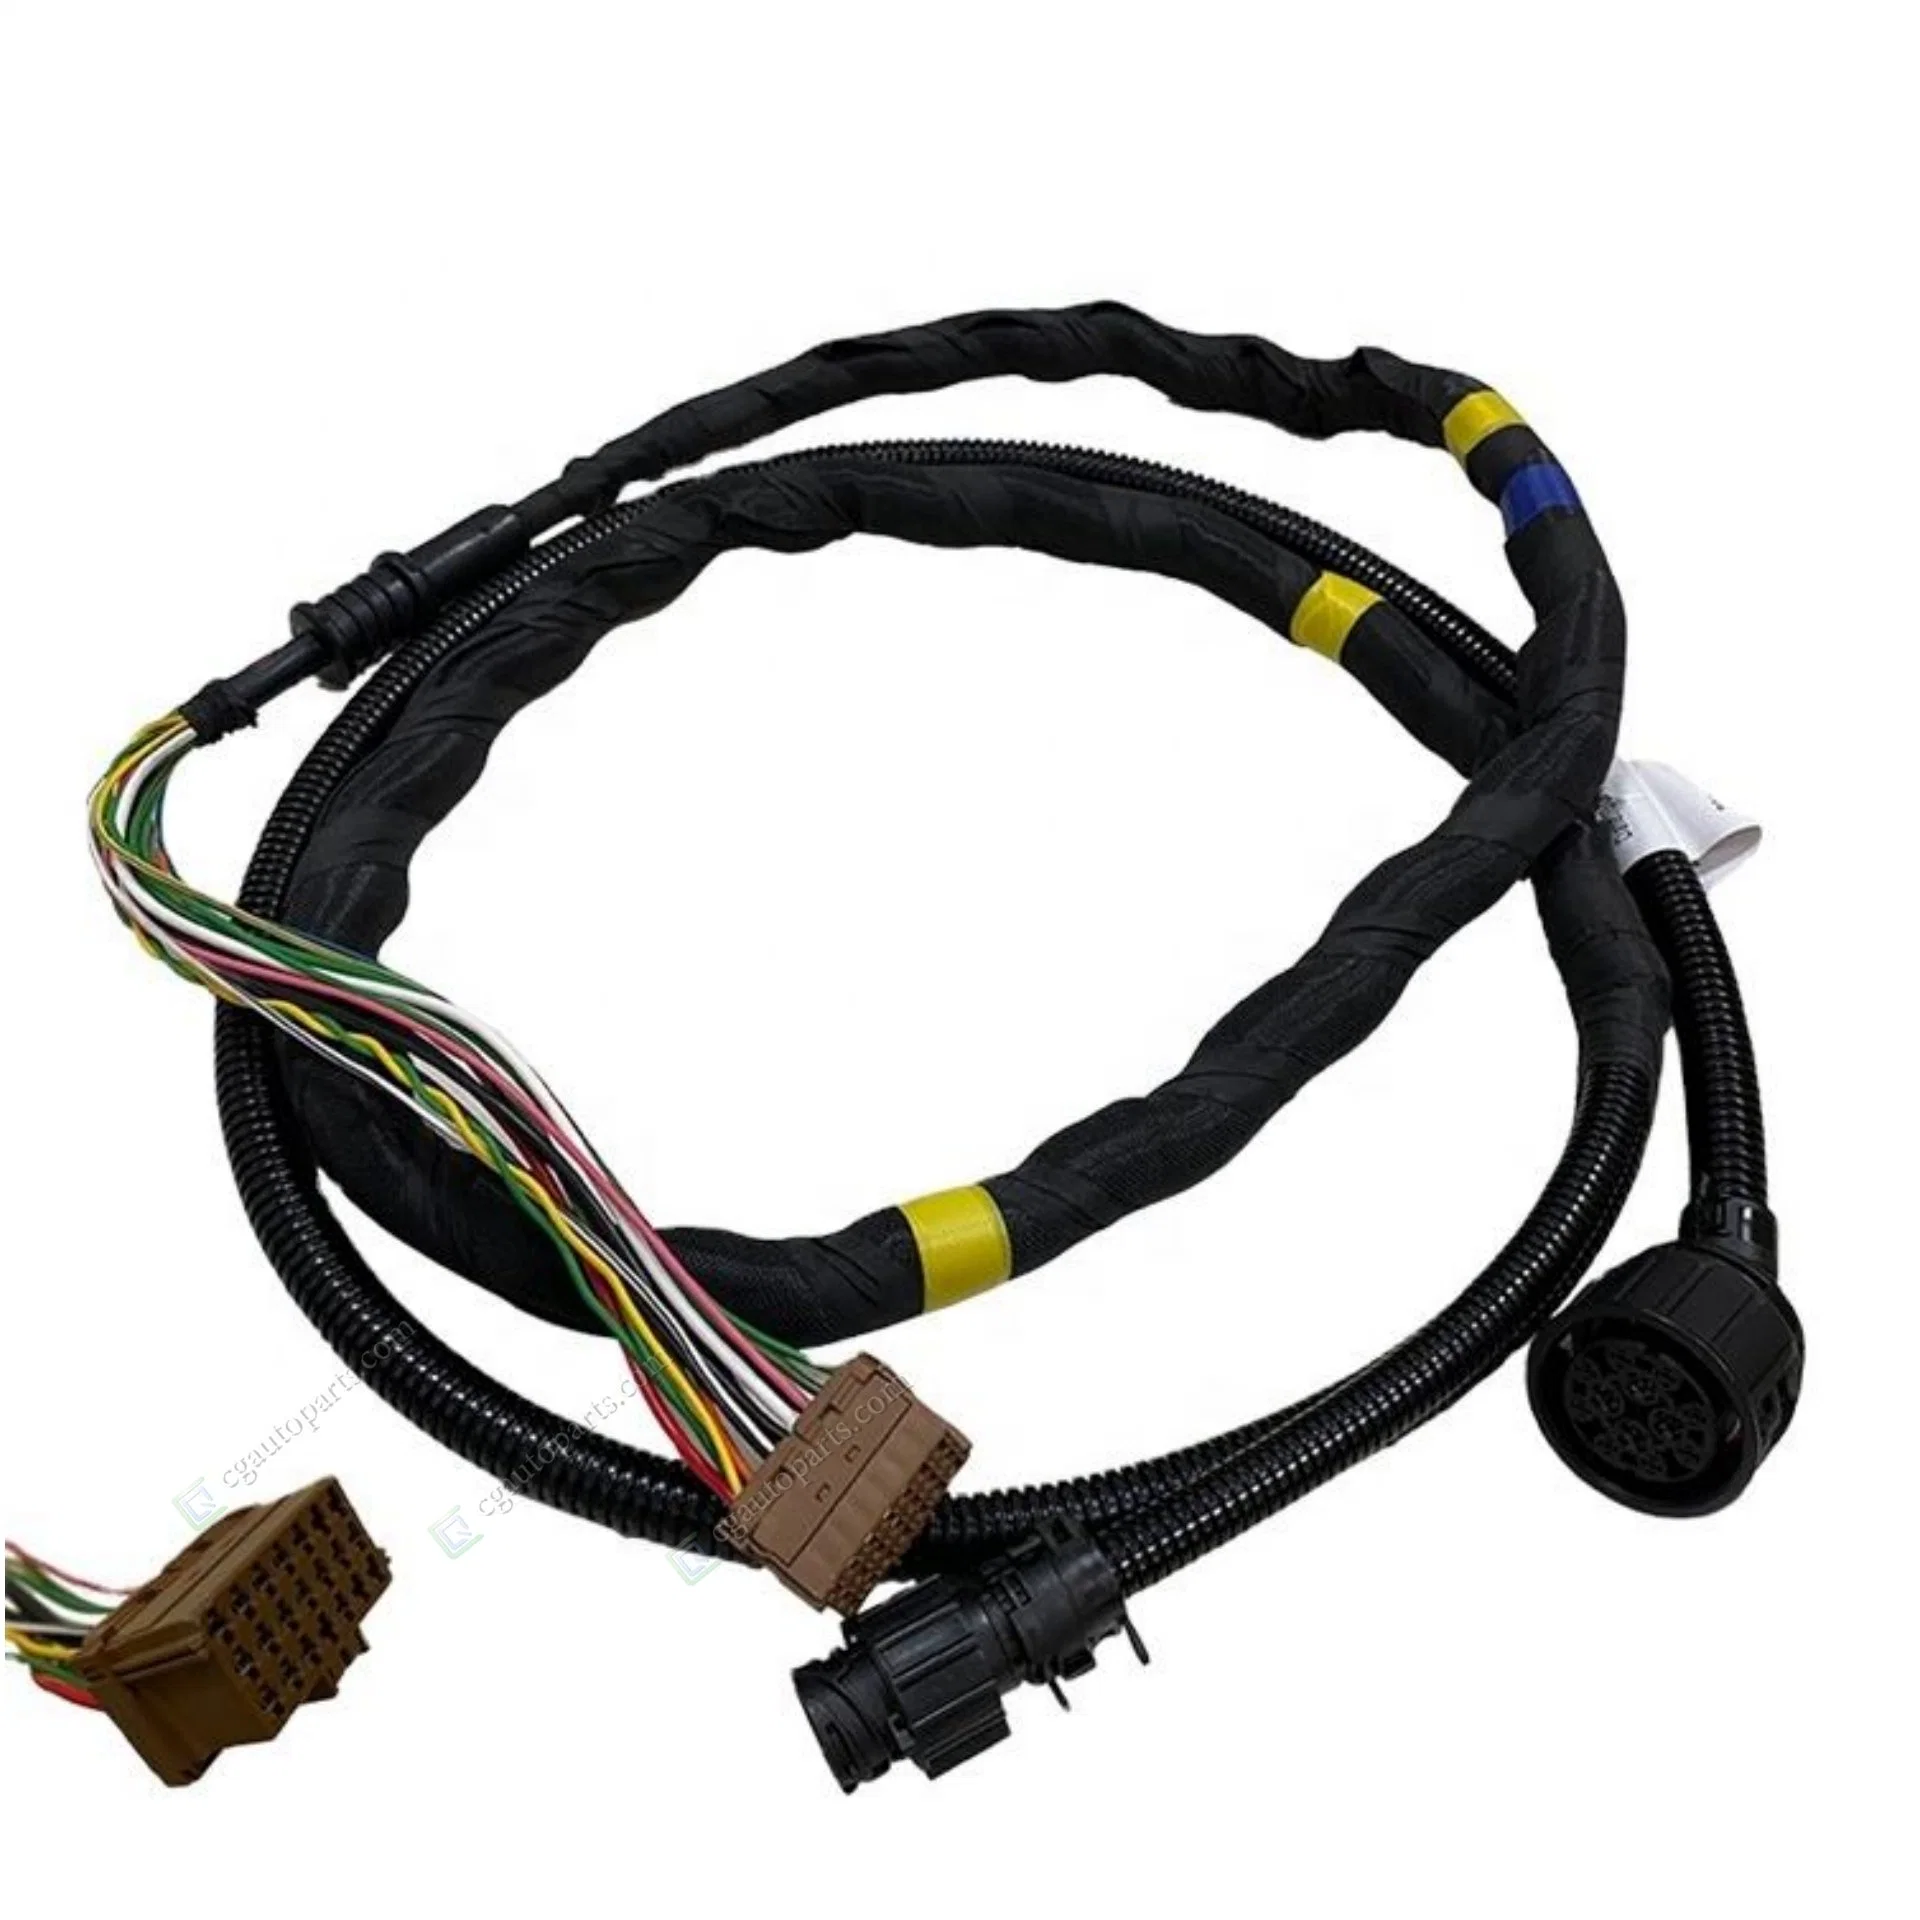 European Auto Spare Parts Vol Engine Wire Harness 20466485 20593612 for Volvo Truck Wiring Harness Connect Cable